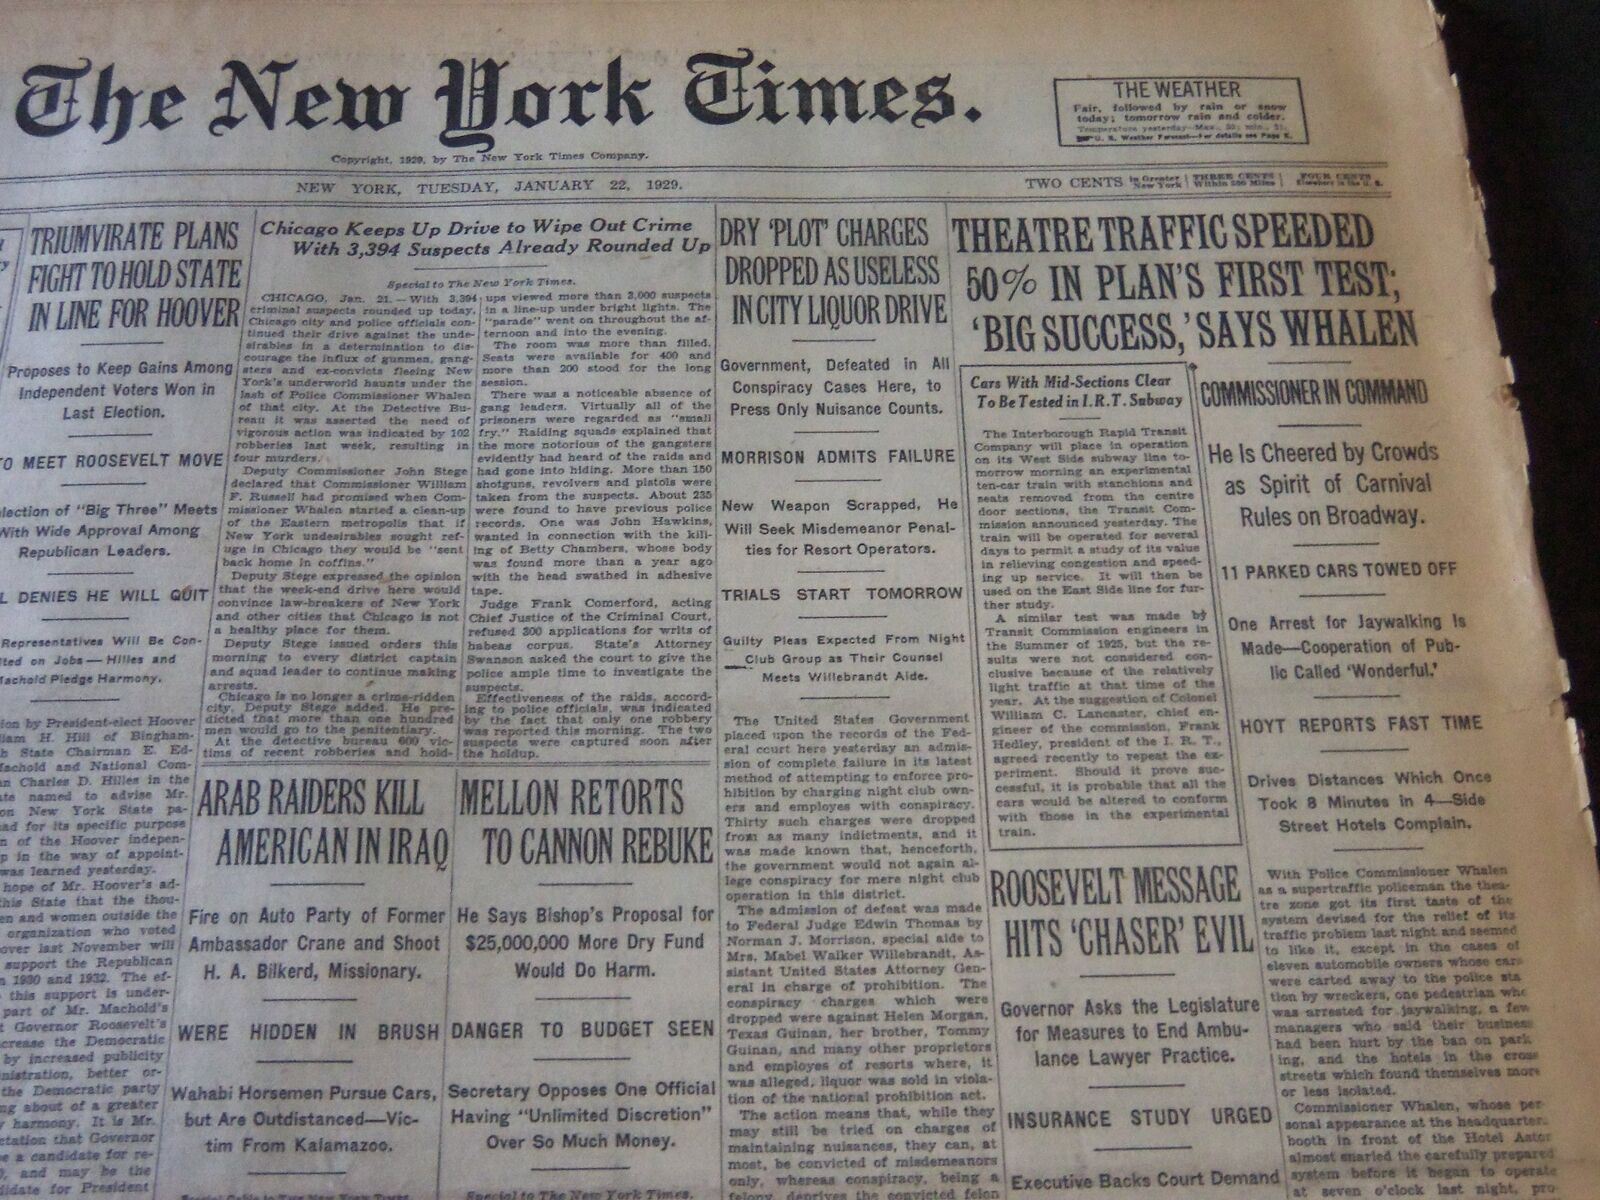 1929 JANUARY 22 NEW YORK TIMES - THEATRE TRAFFIC SPEEDED 50% - NT 6642